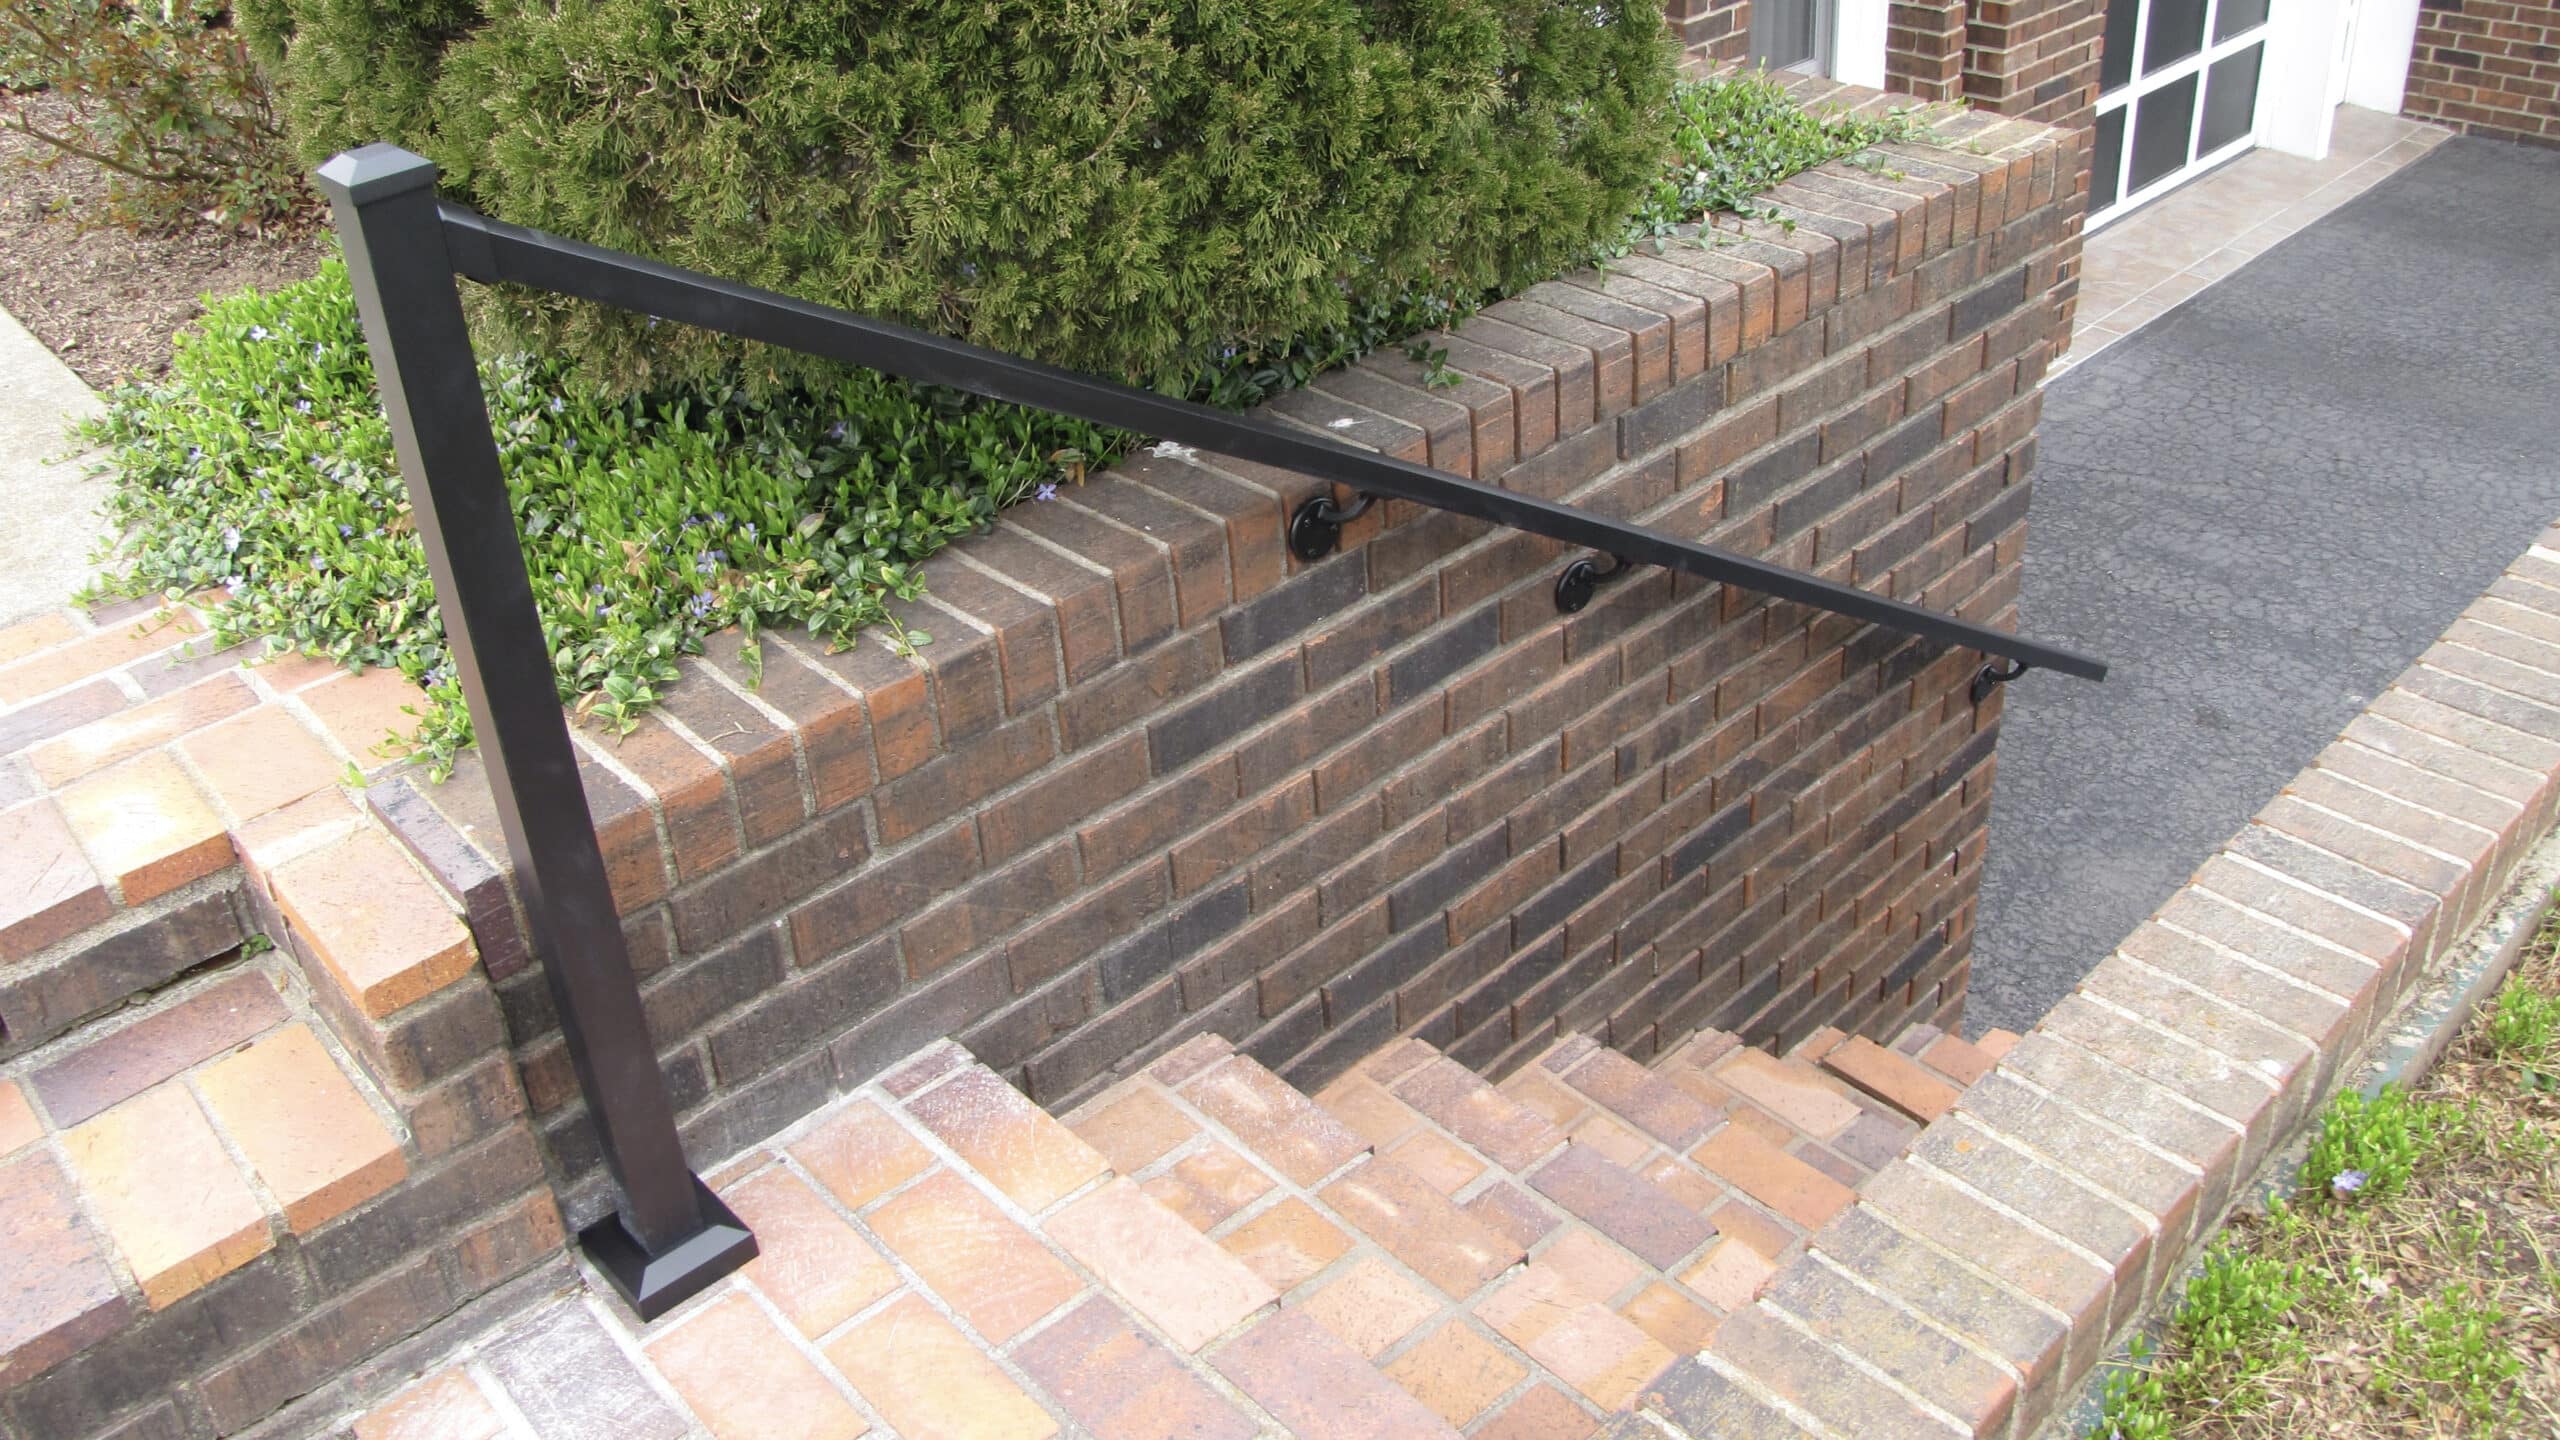 Downward view of brick steps with aluminum handrail on one side